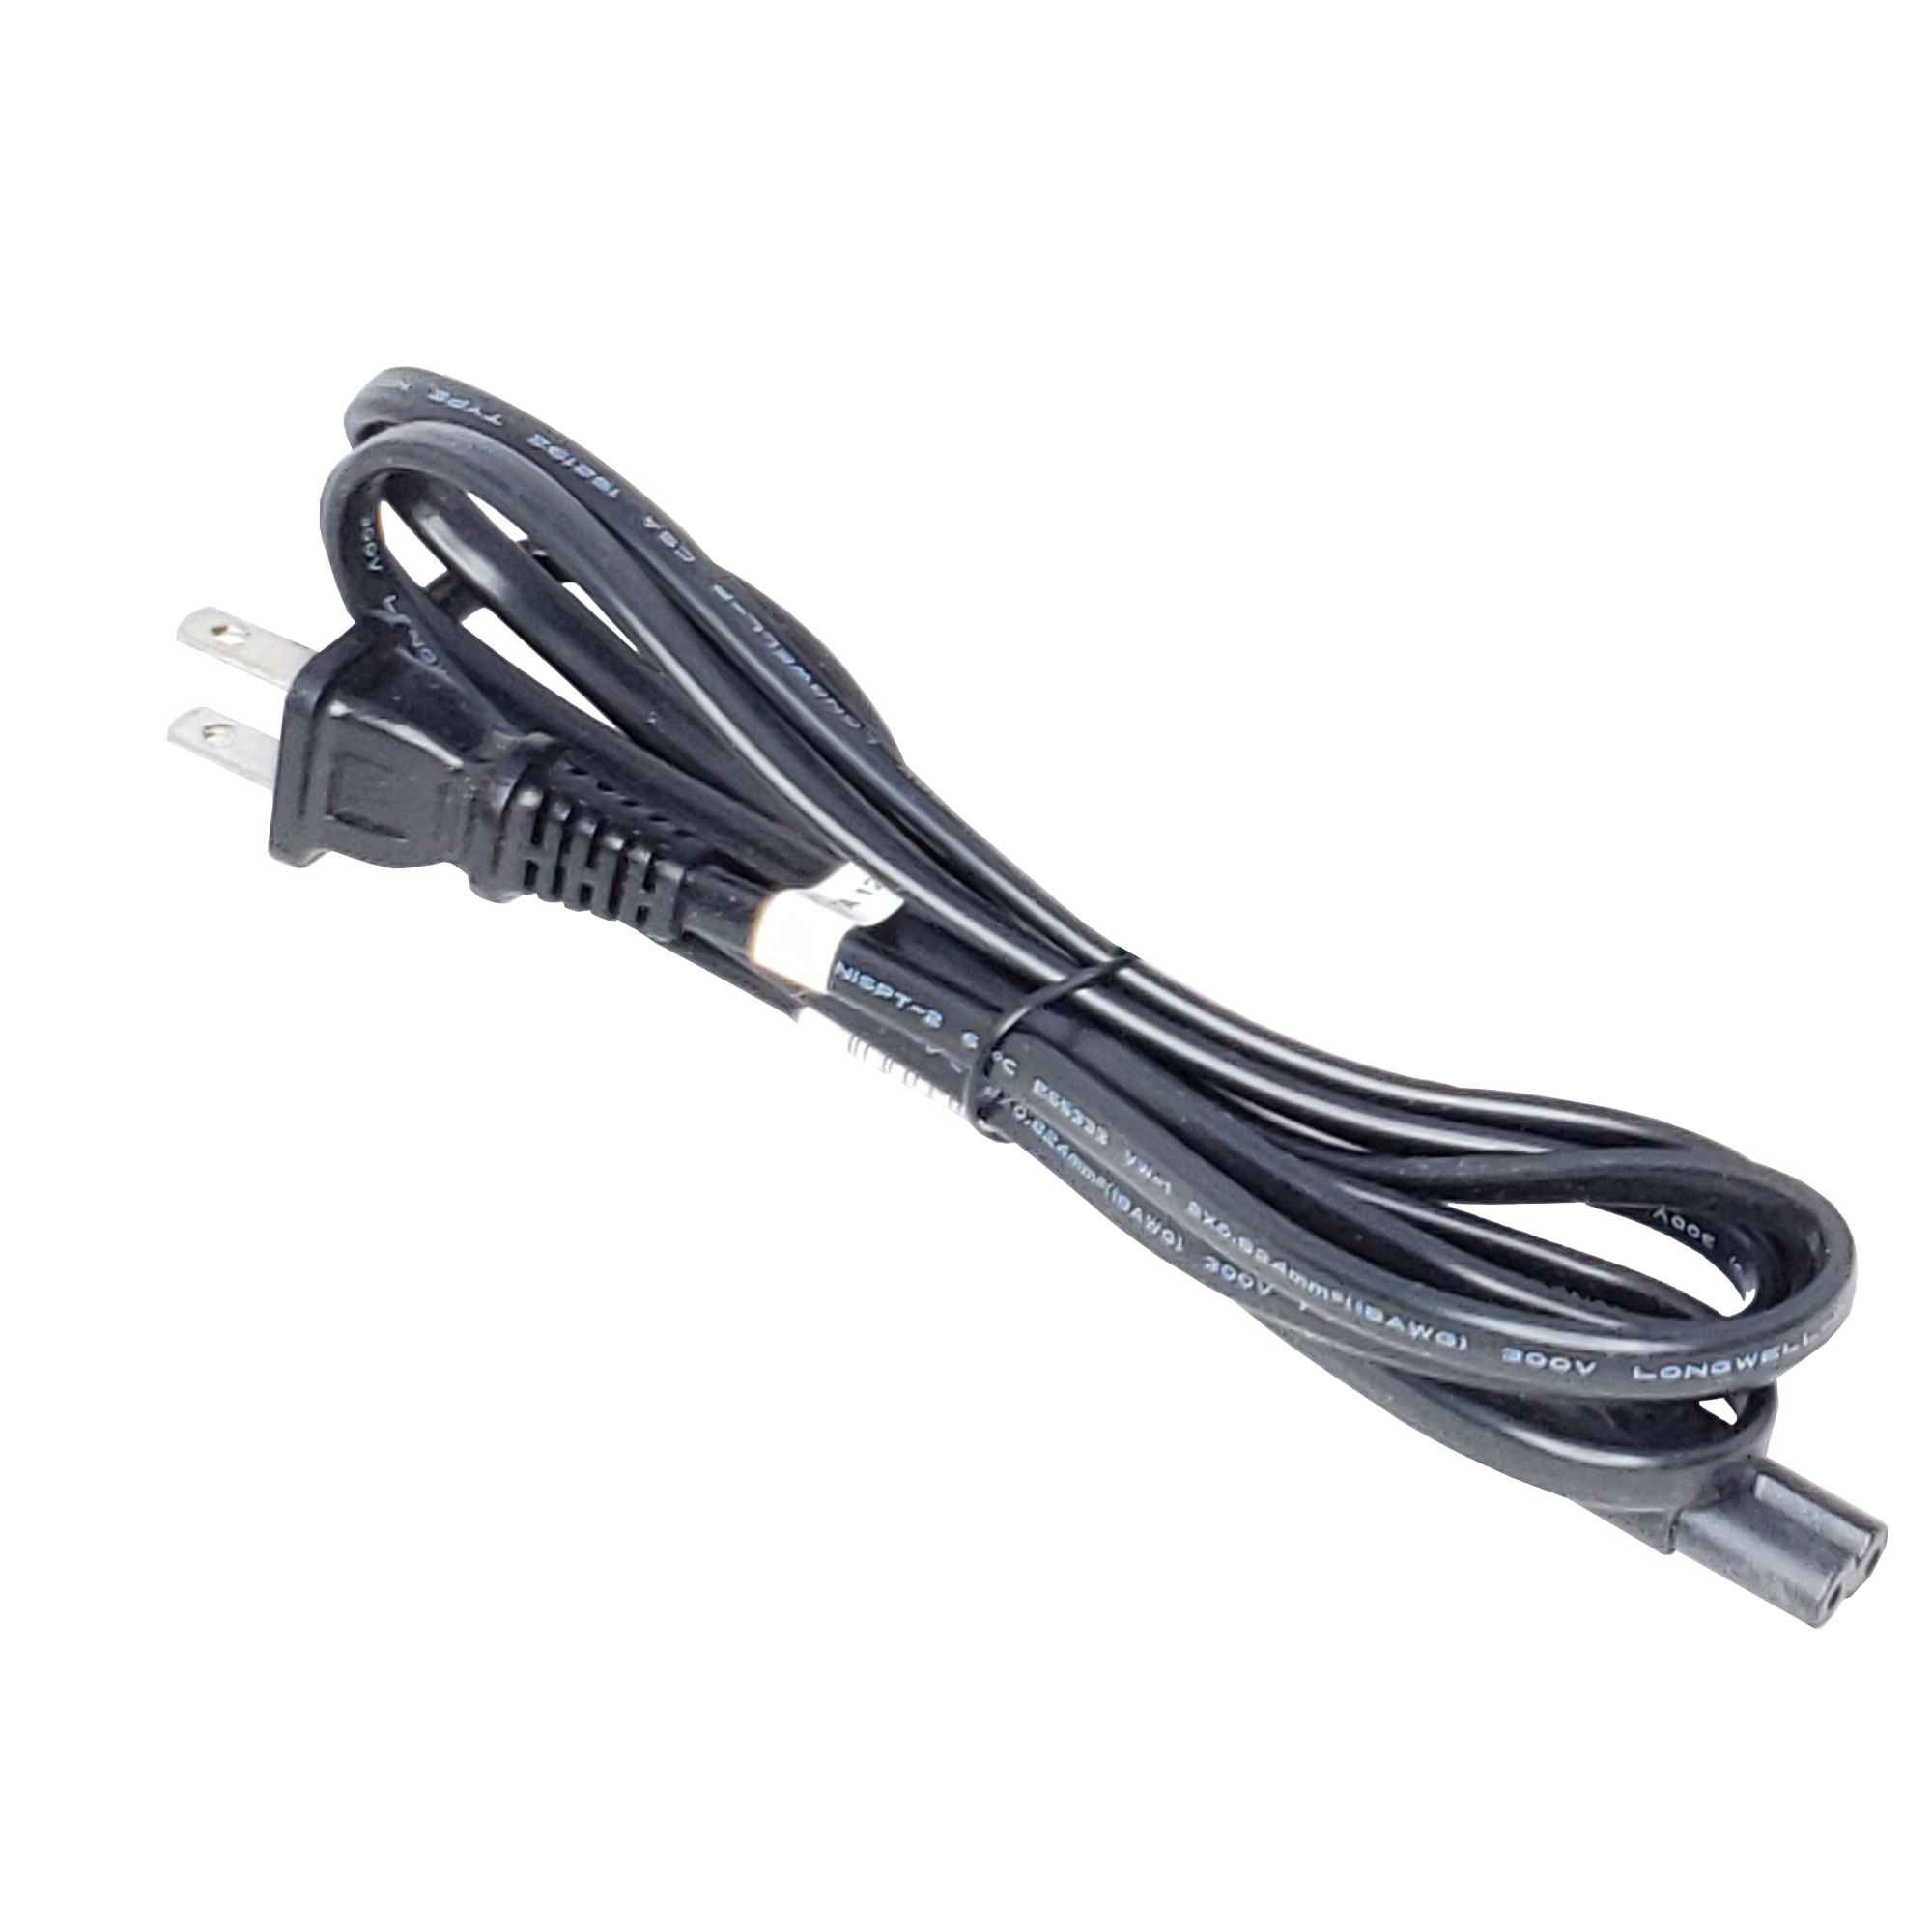 CABLE, iSC480/iCT POWER CORD - 122-00143